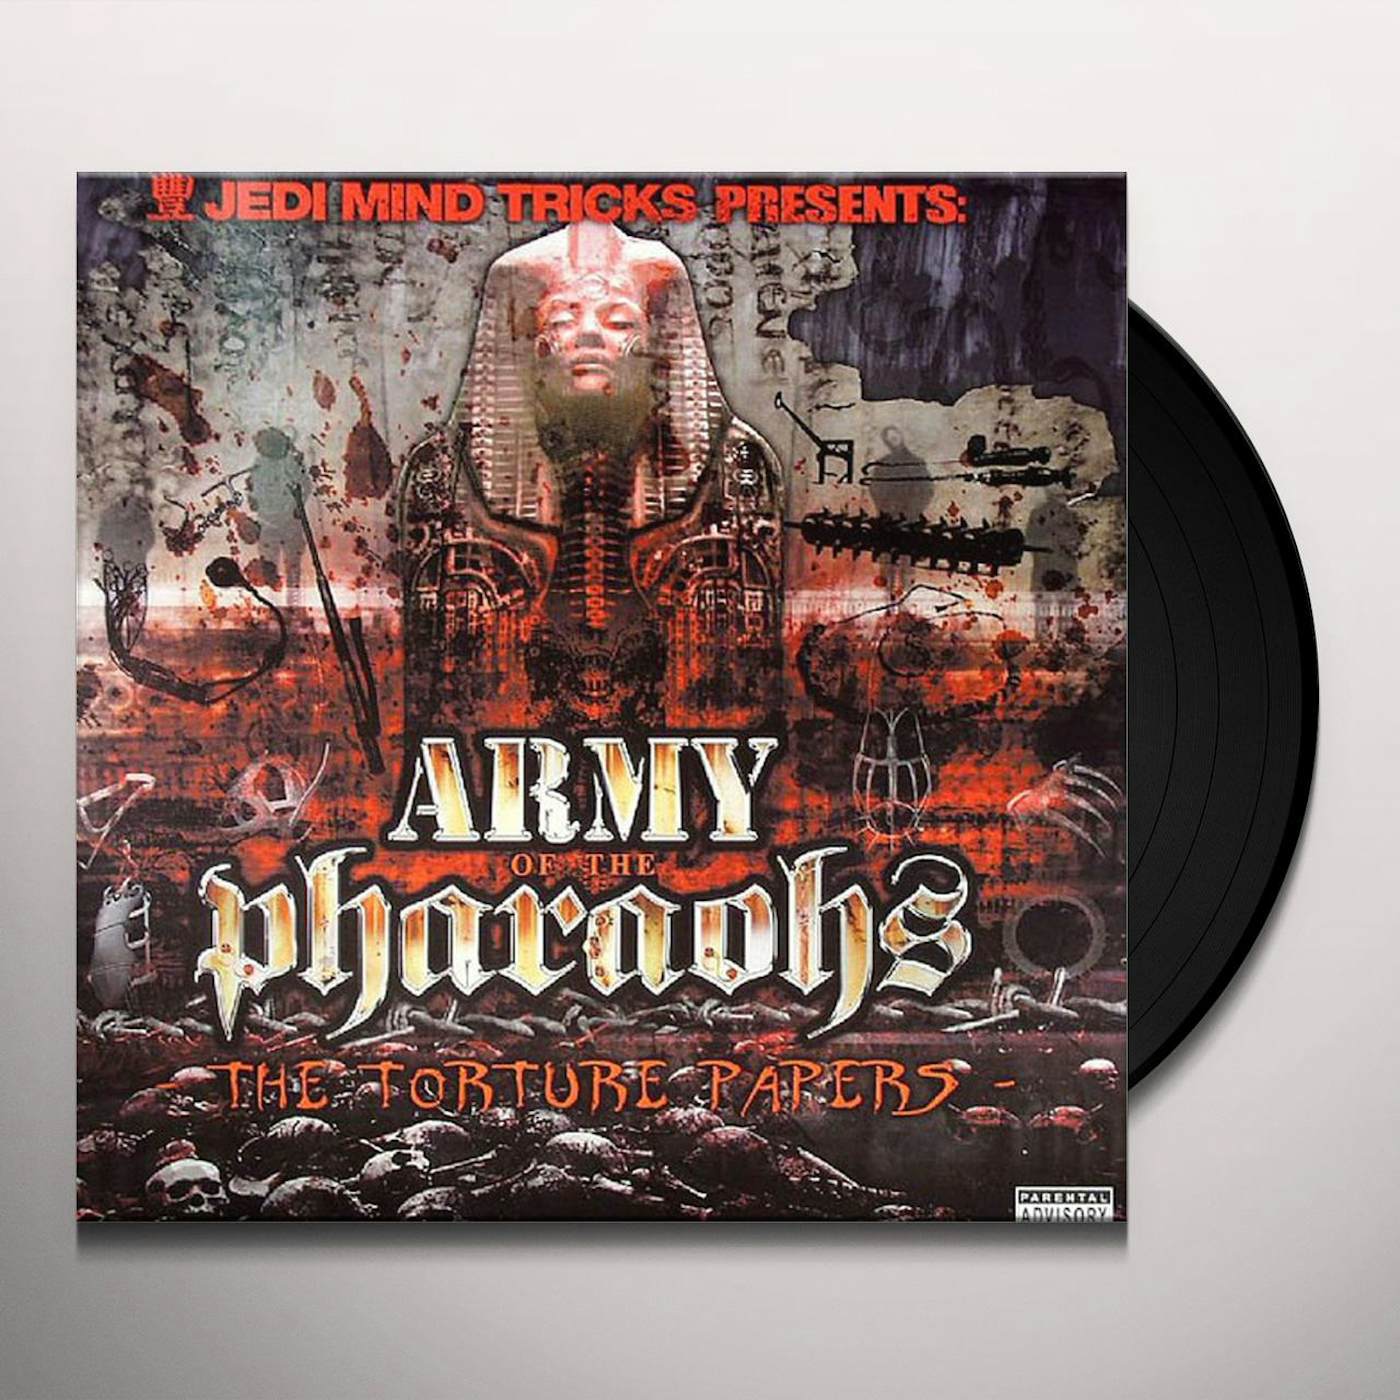 Jedi Mind Tricks ARMY OF THE PHARAOHS: TORTURE PAPERS Vinyl Record